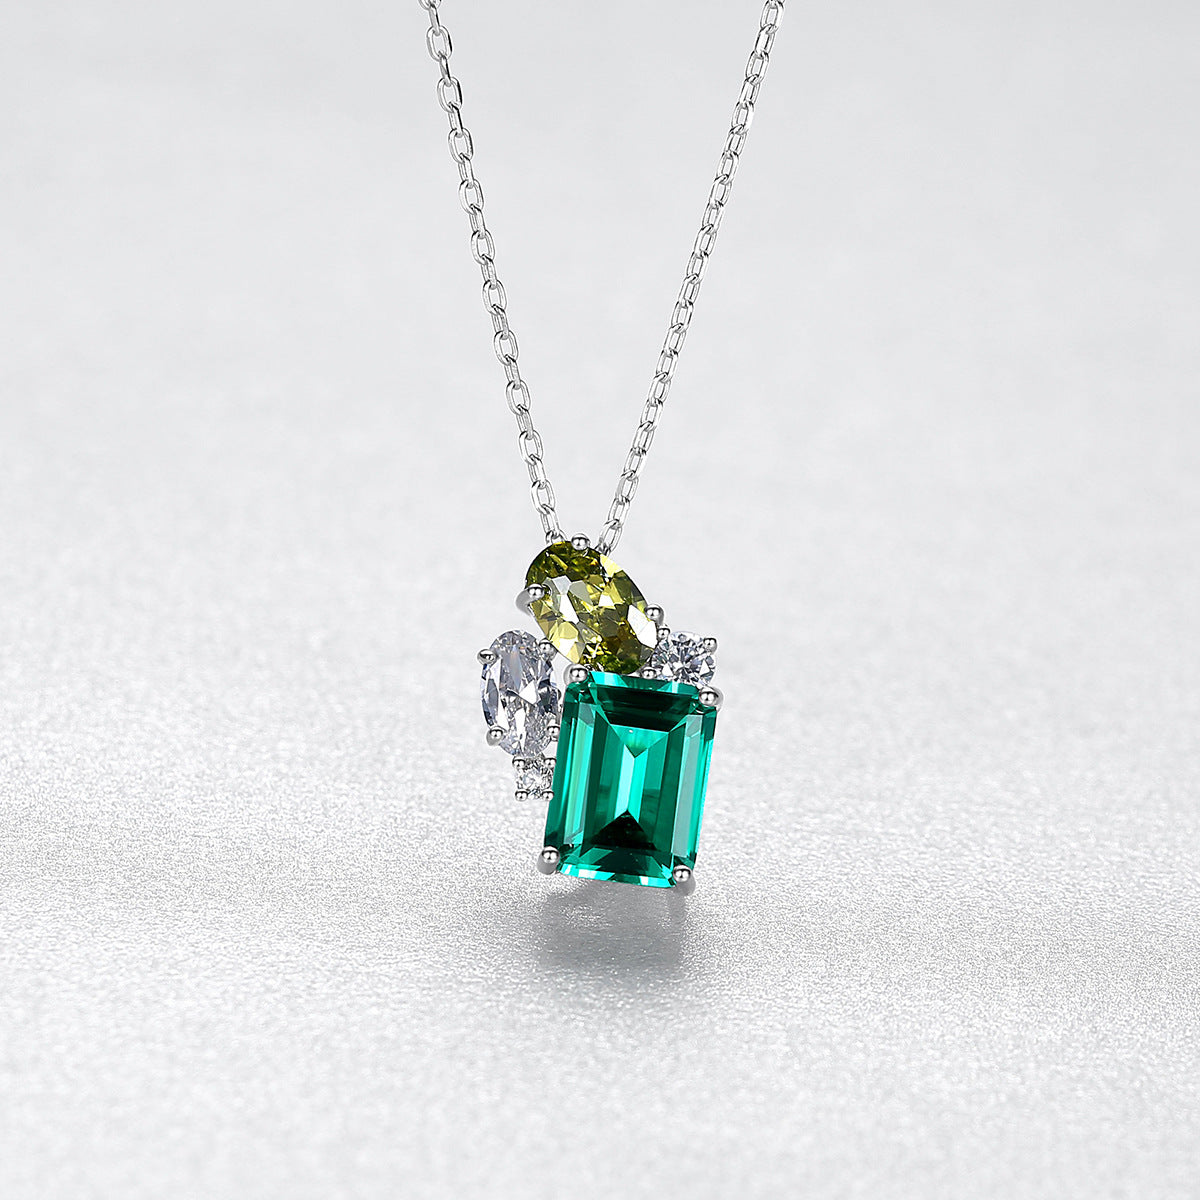 Gemstonely-S925 Sterling Silver Cross Necklace with Simulated Emerald Gemstone - Timeless Elegance and Distinctive Style for Women